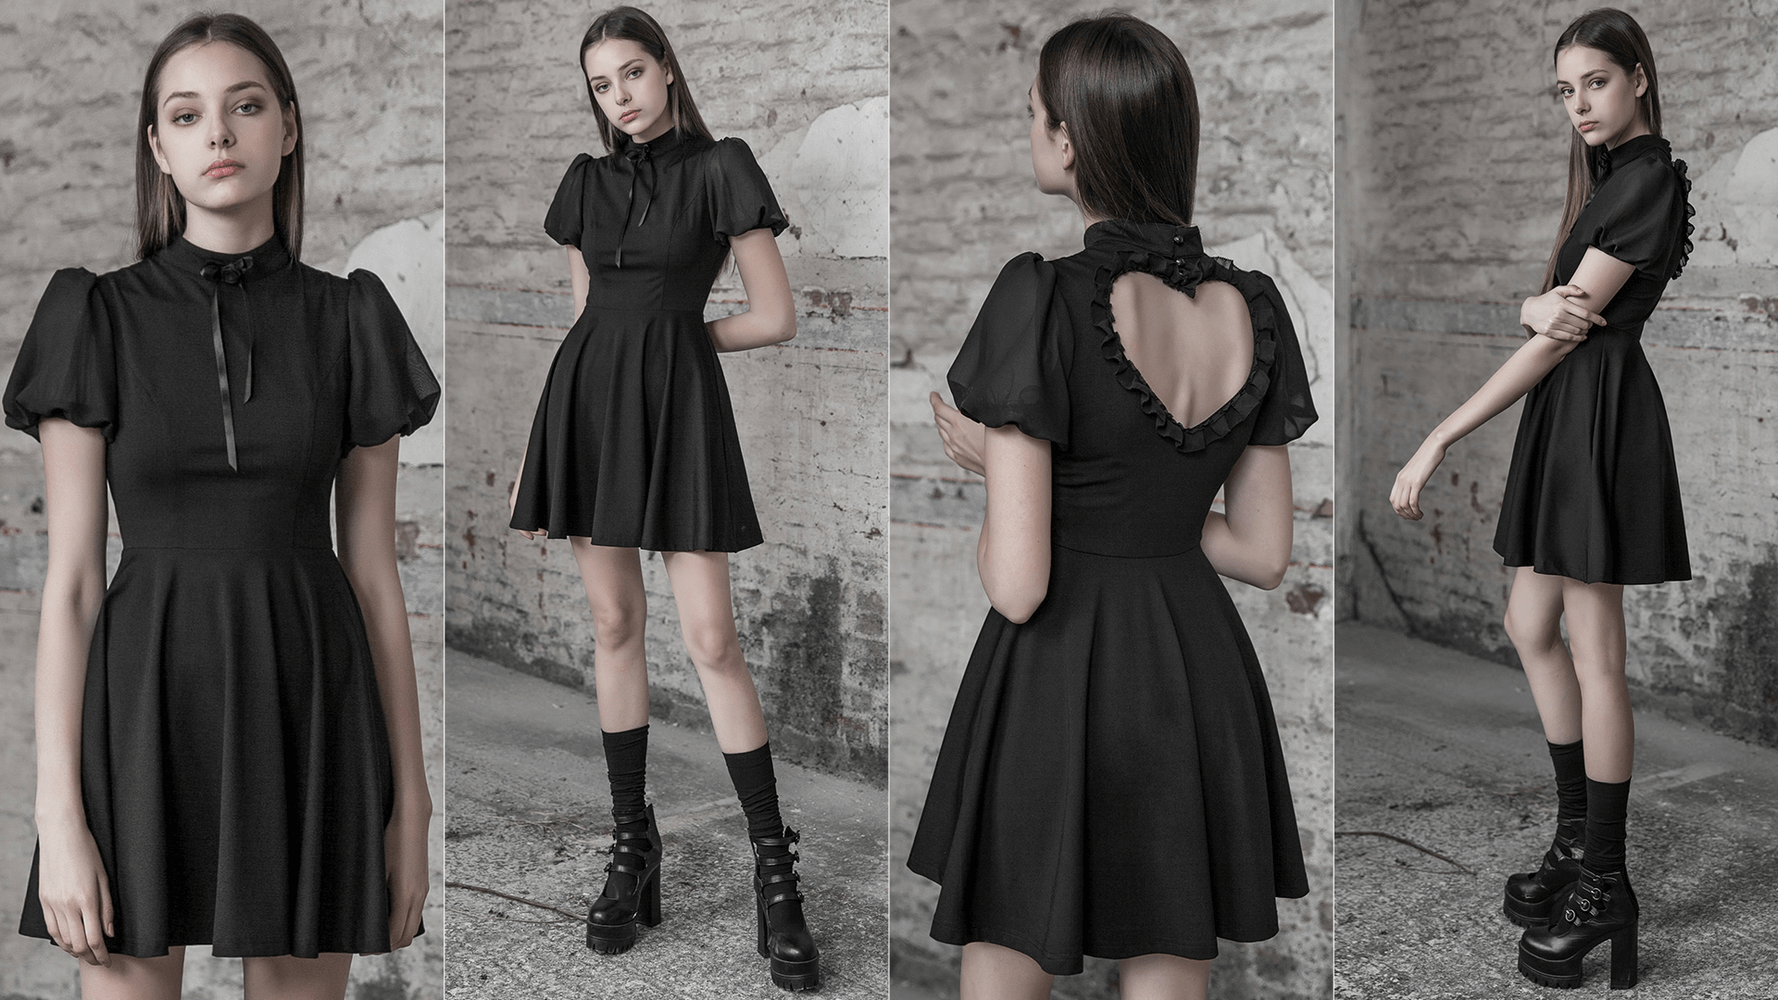 Elegant Black A-Line Dress with Sheer Puff Sleeves